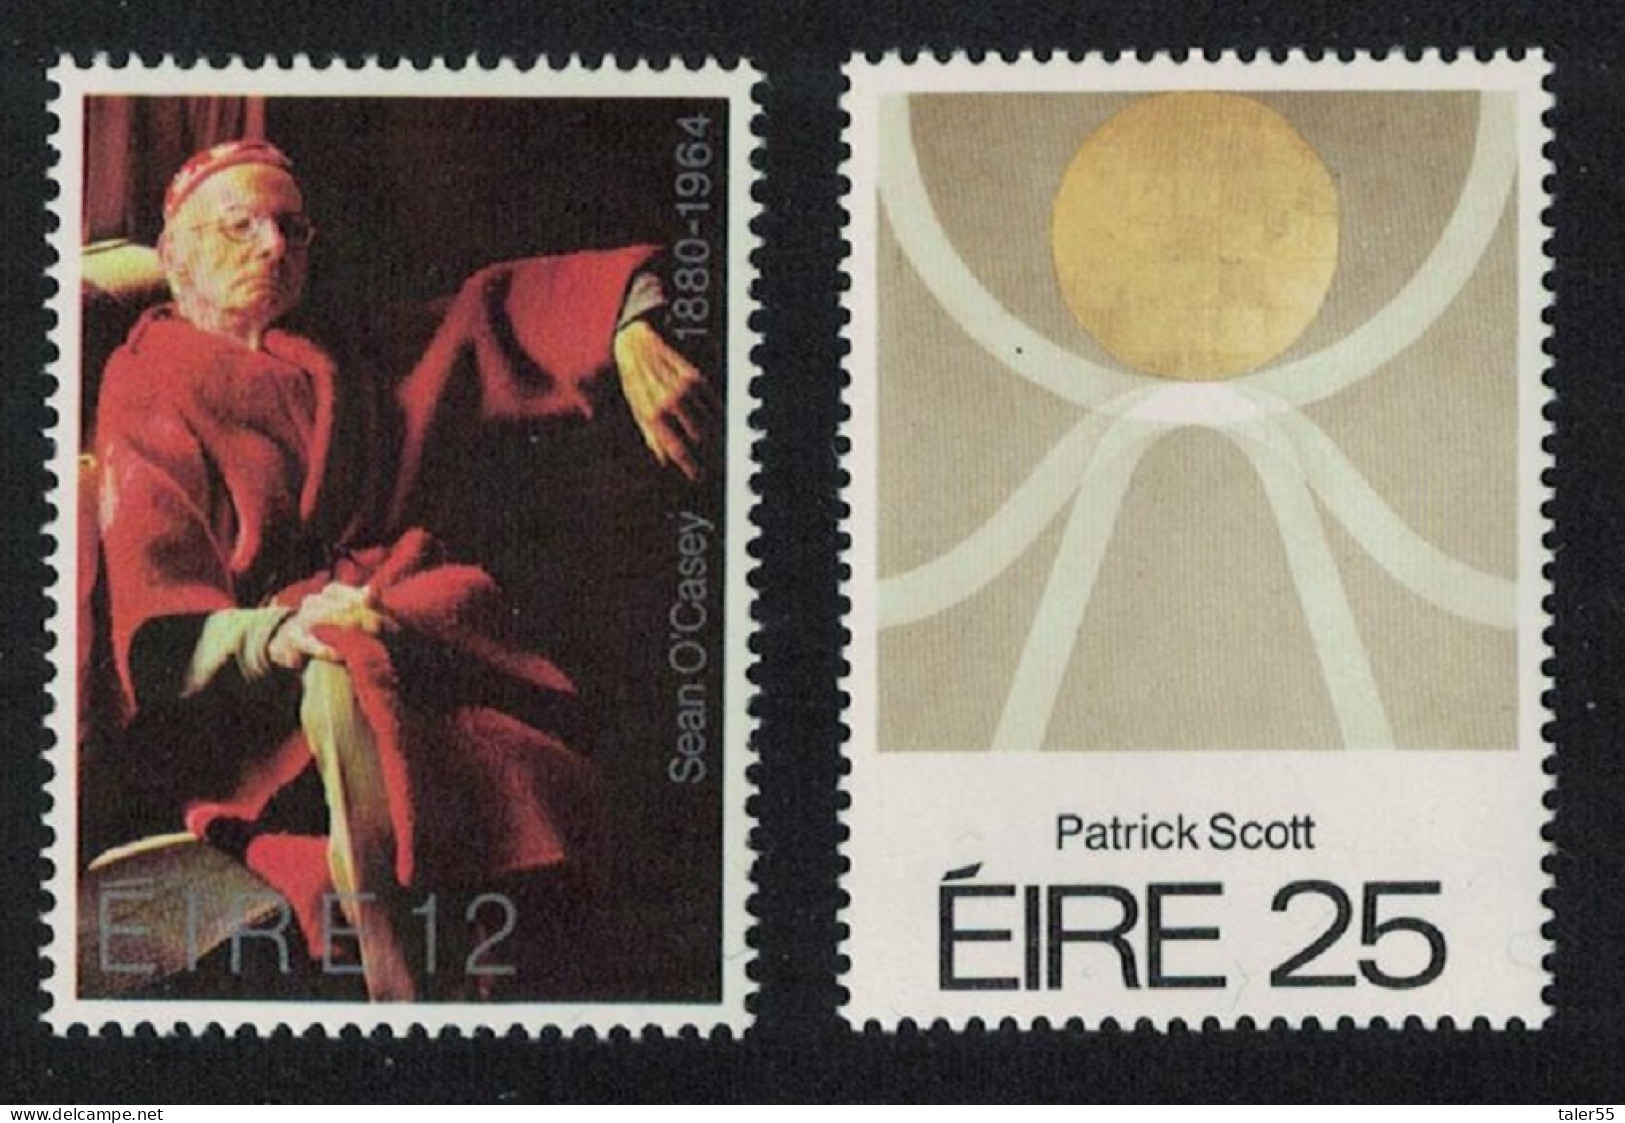 Ireland Playwright Painter Commemorations 2v 1980 MNH SG#469-470 - Unused Stamps